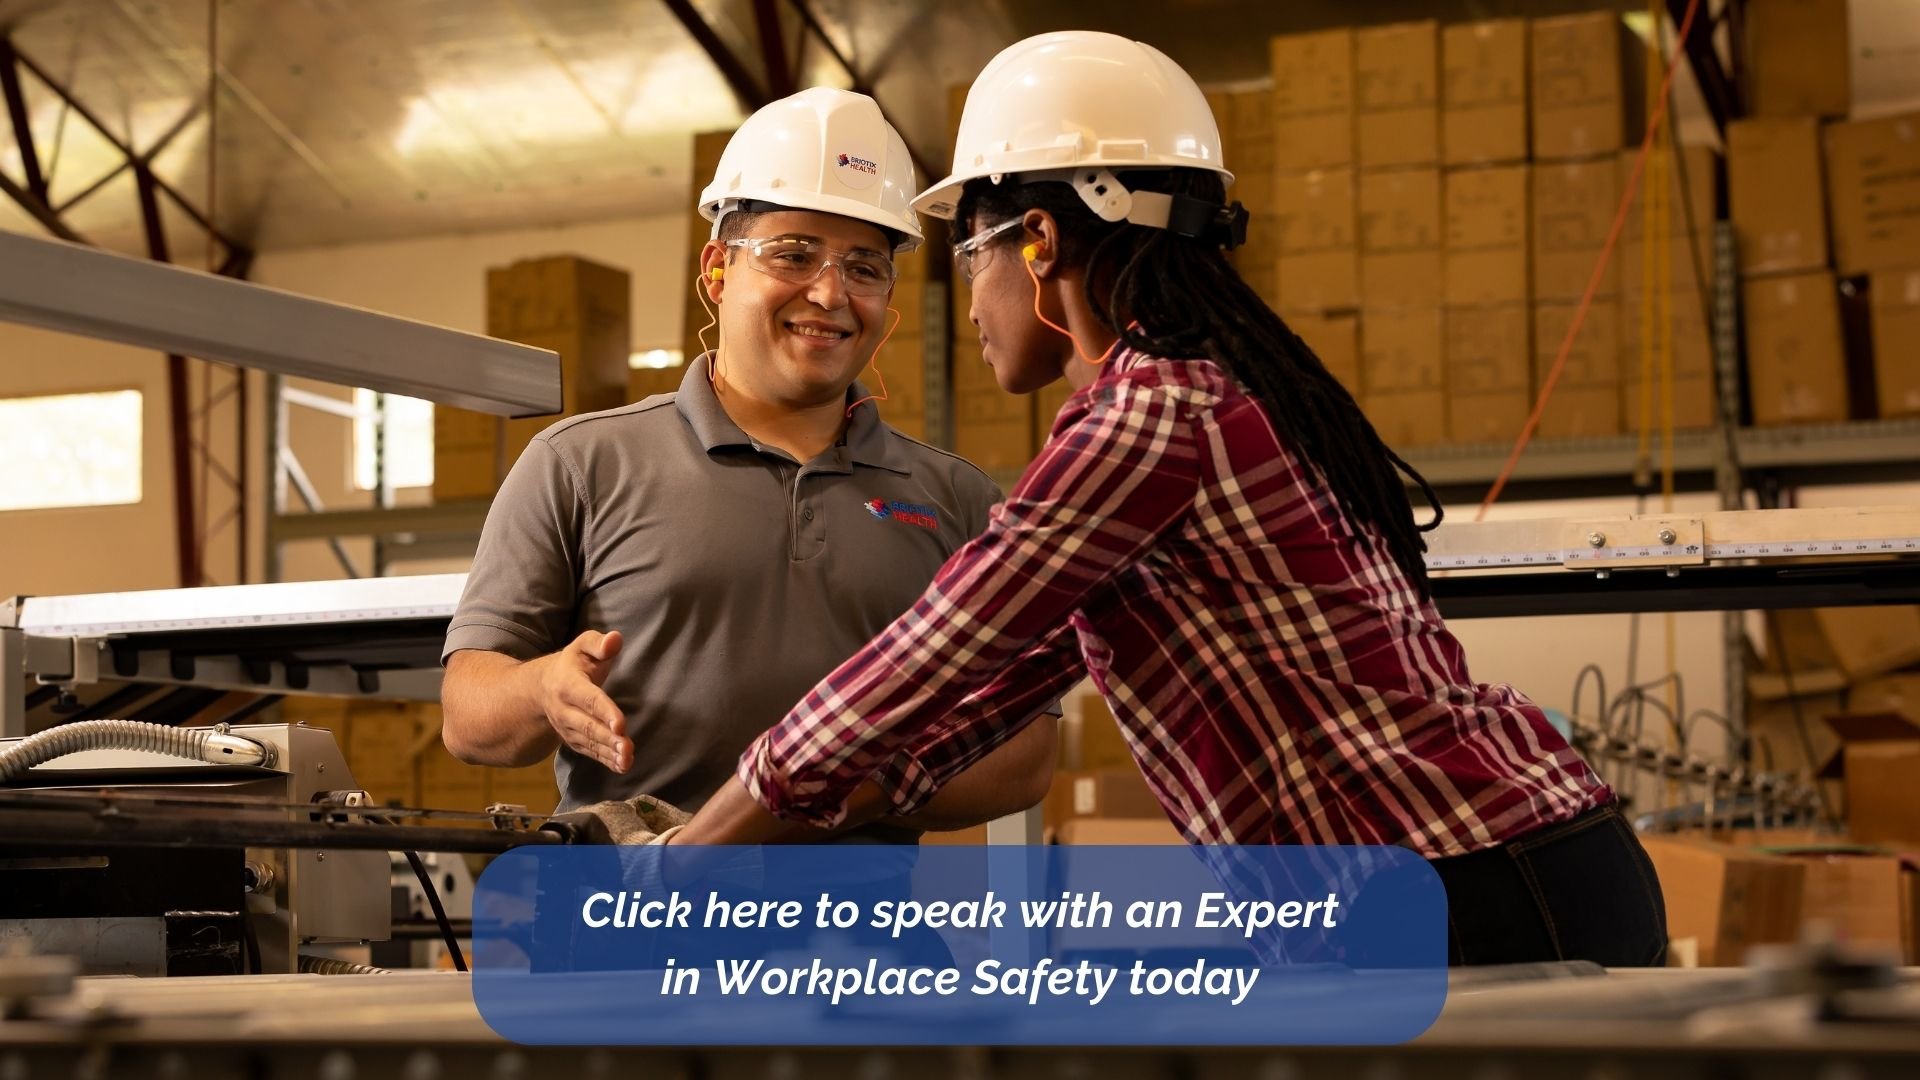 Click here to speak with an Expert in Workplace Safety today